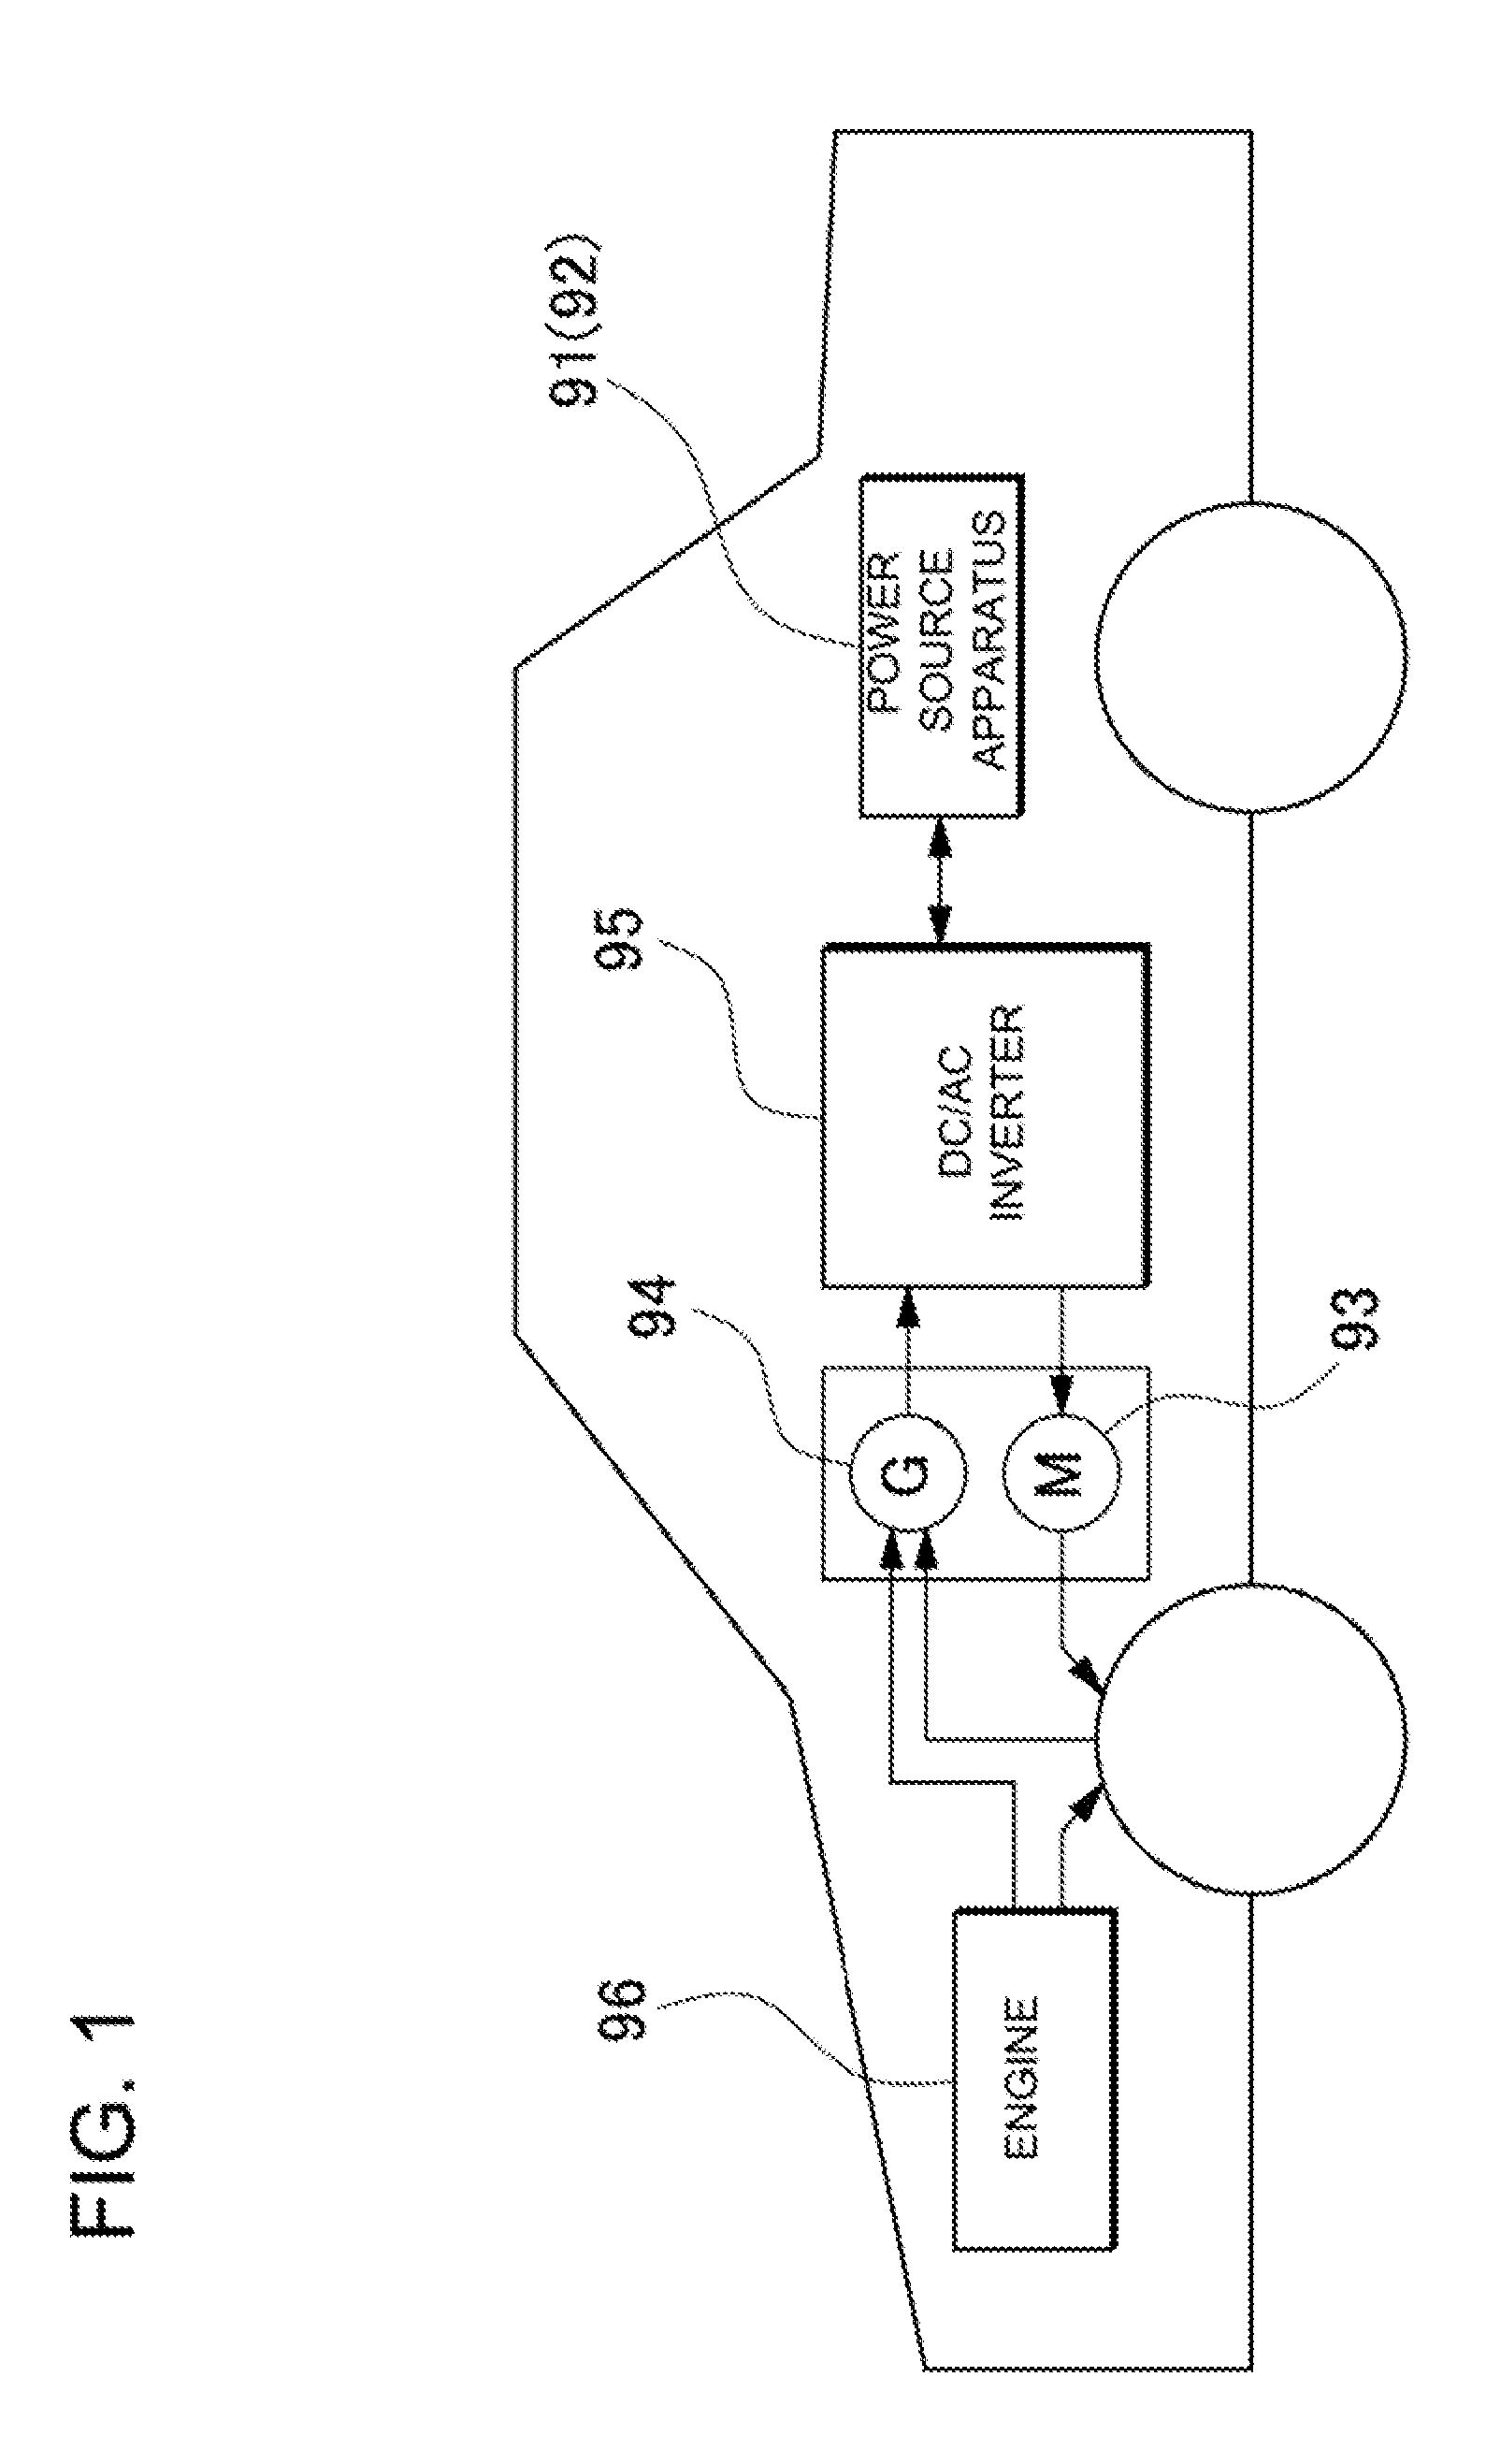 Power source apparatus with electrical components disposed in the battery blocks